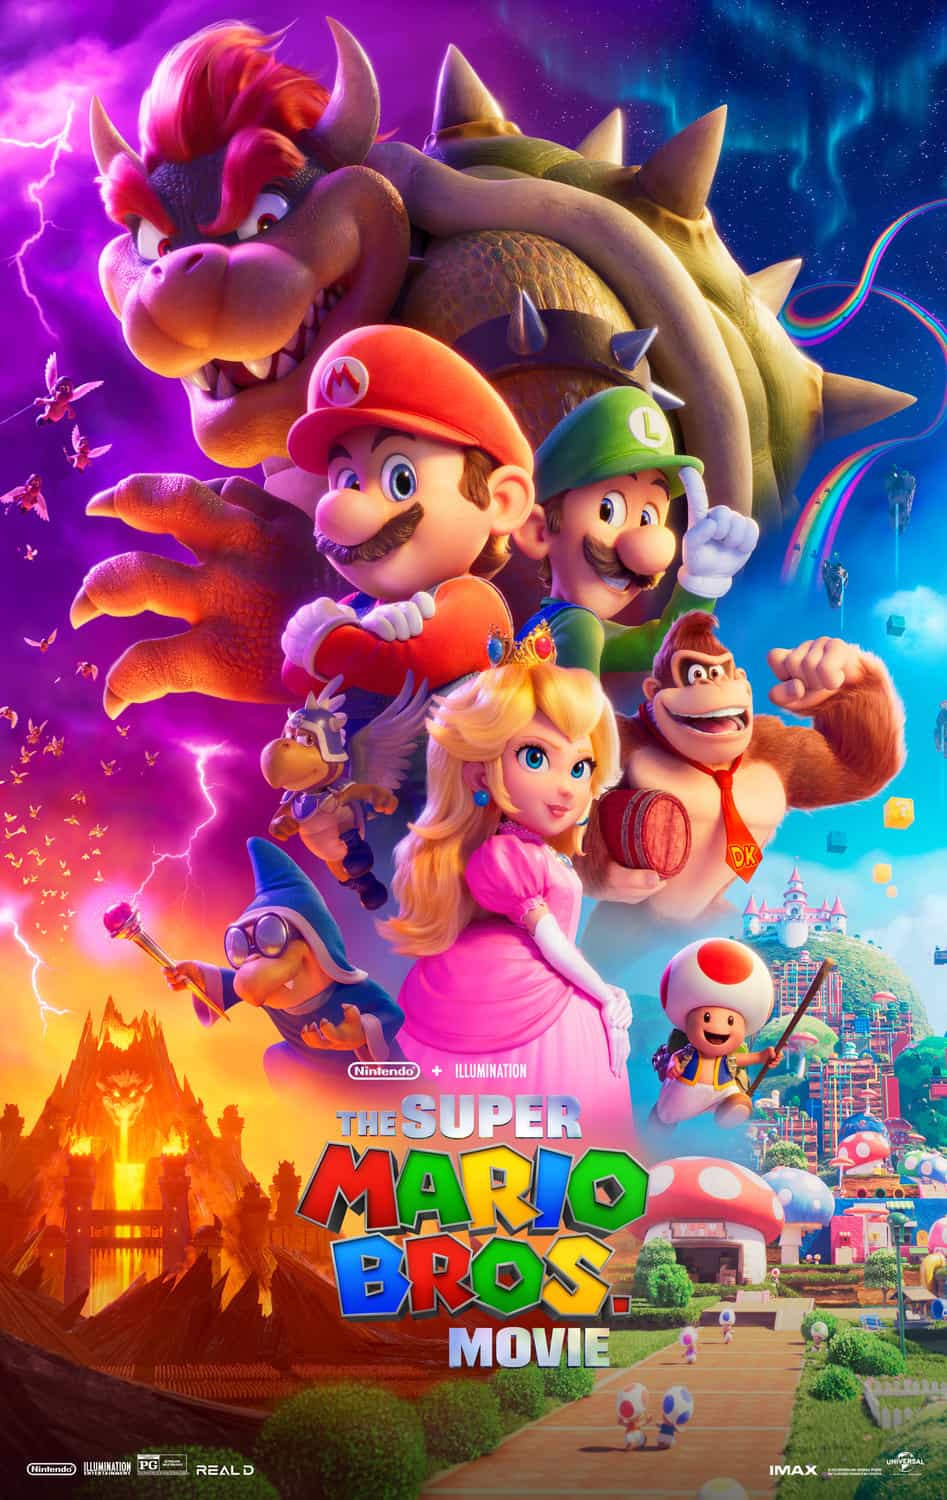 A new trailer has been released for The Super Mario Bros. Movie starring Chris Pratt - movie UK release date 7th April 2023 #thesupermariobrosmovie